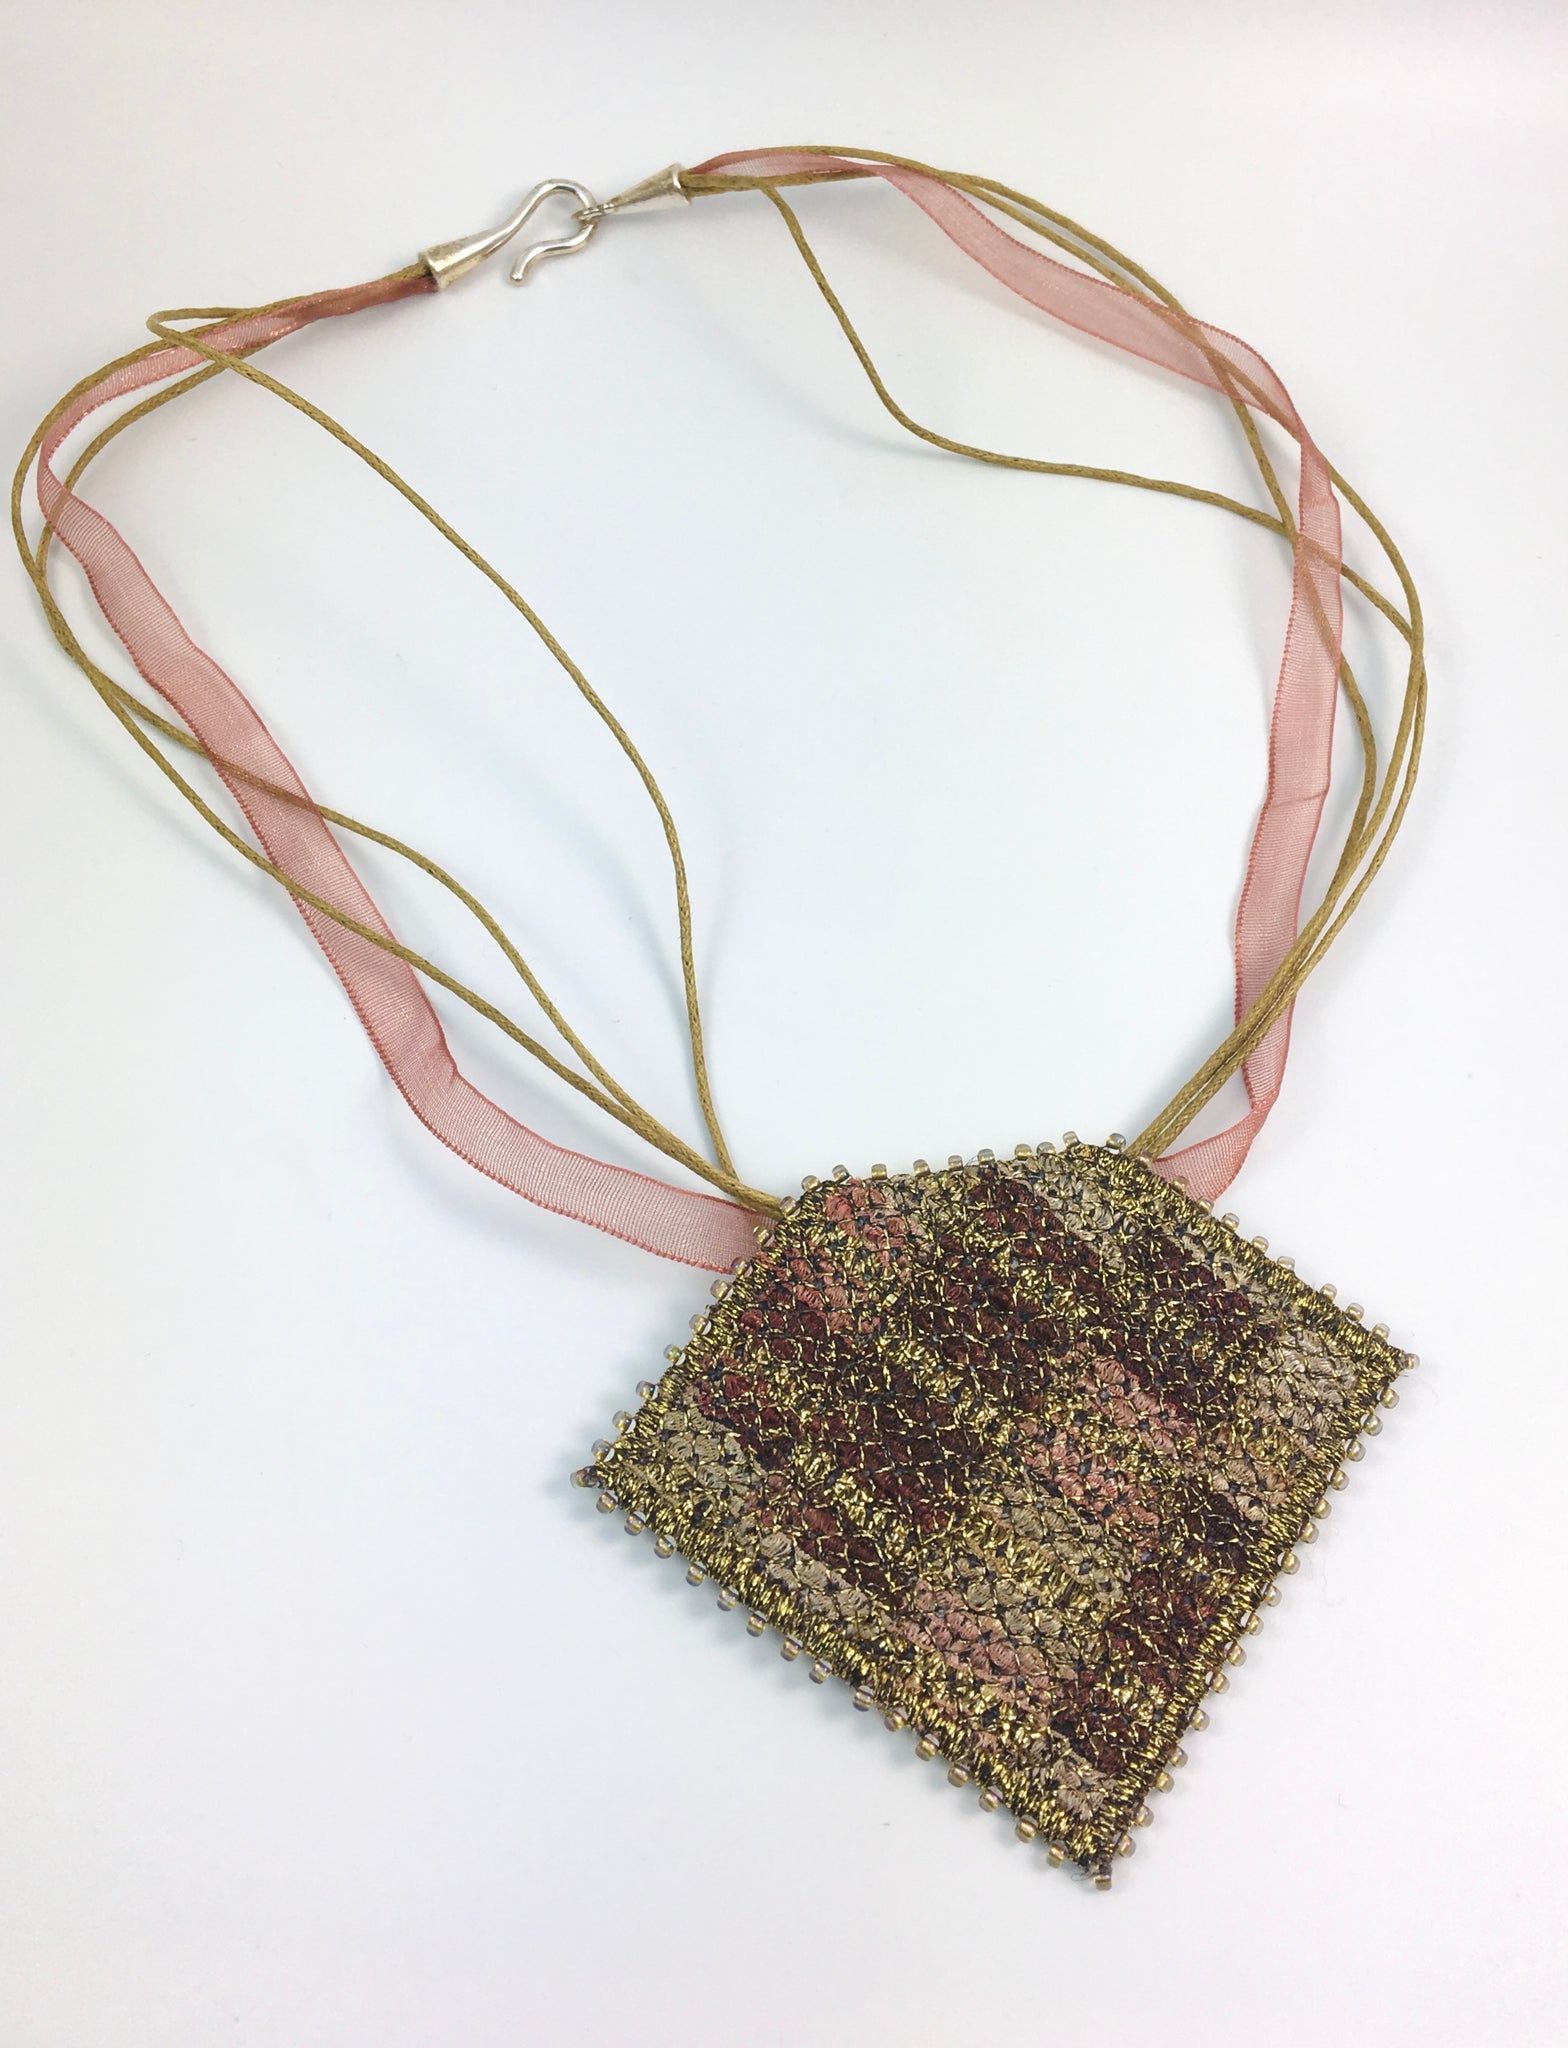 Golden browns embroidered & beaded statement pendant necklace